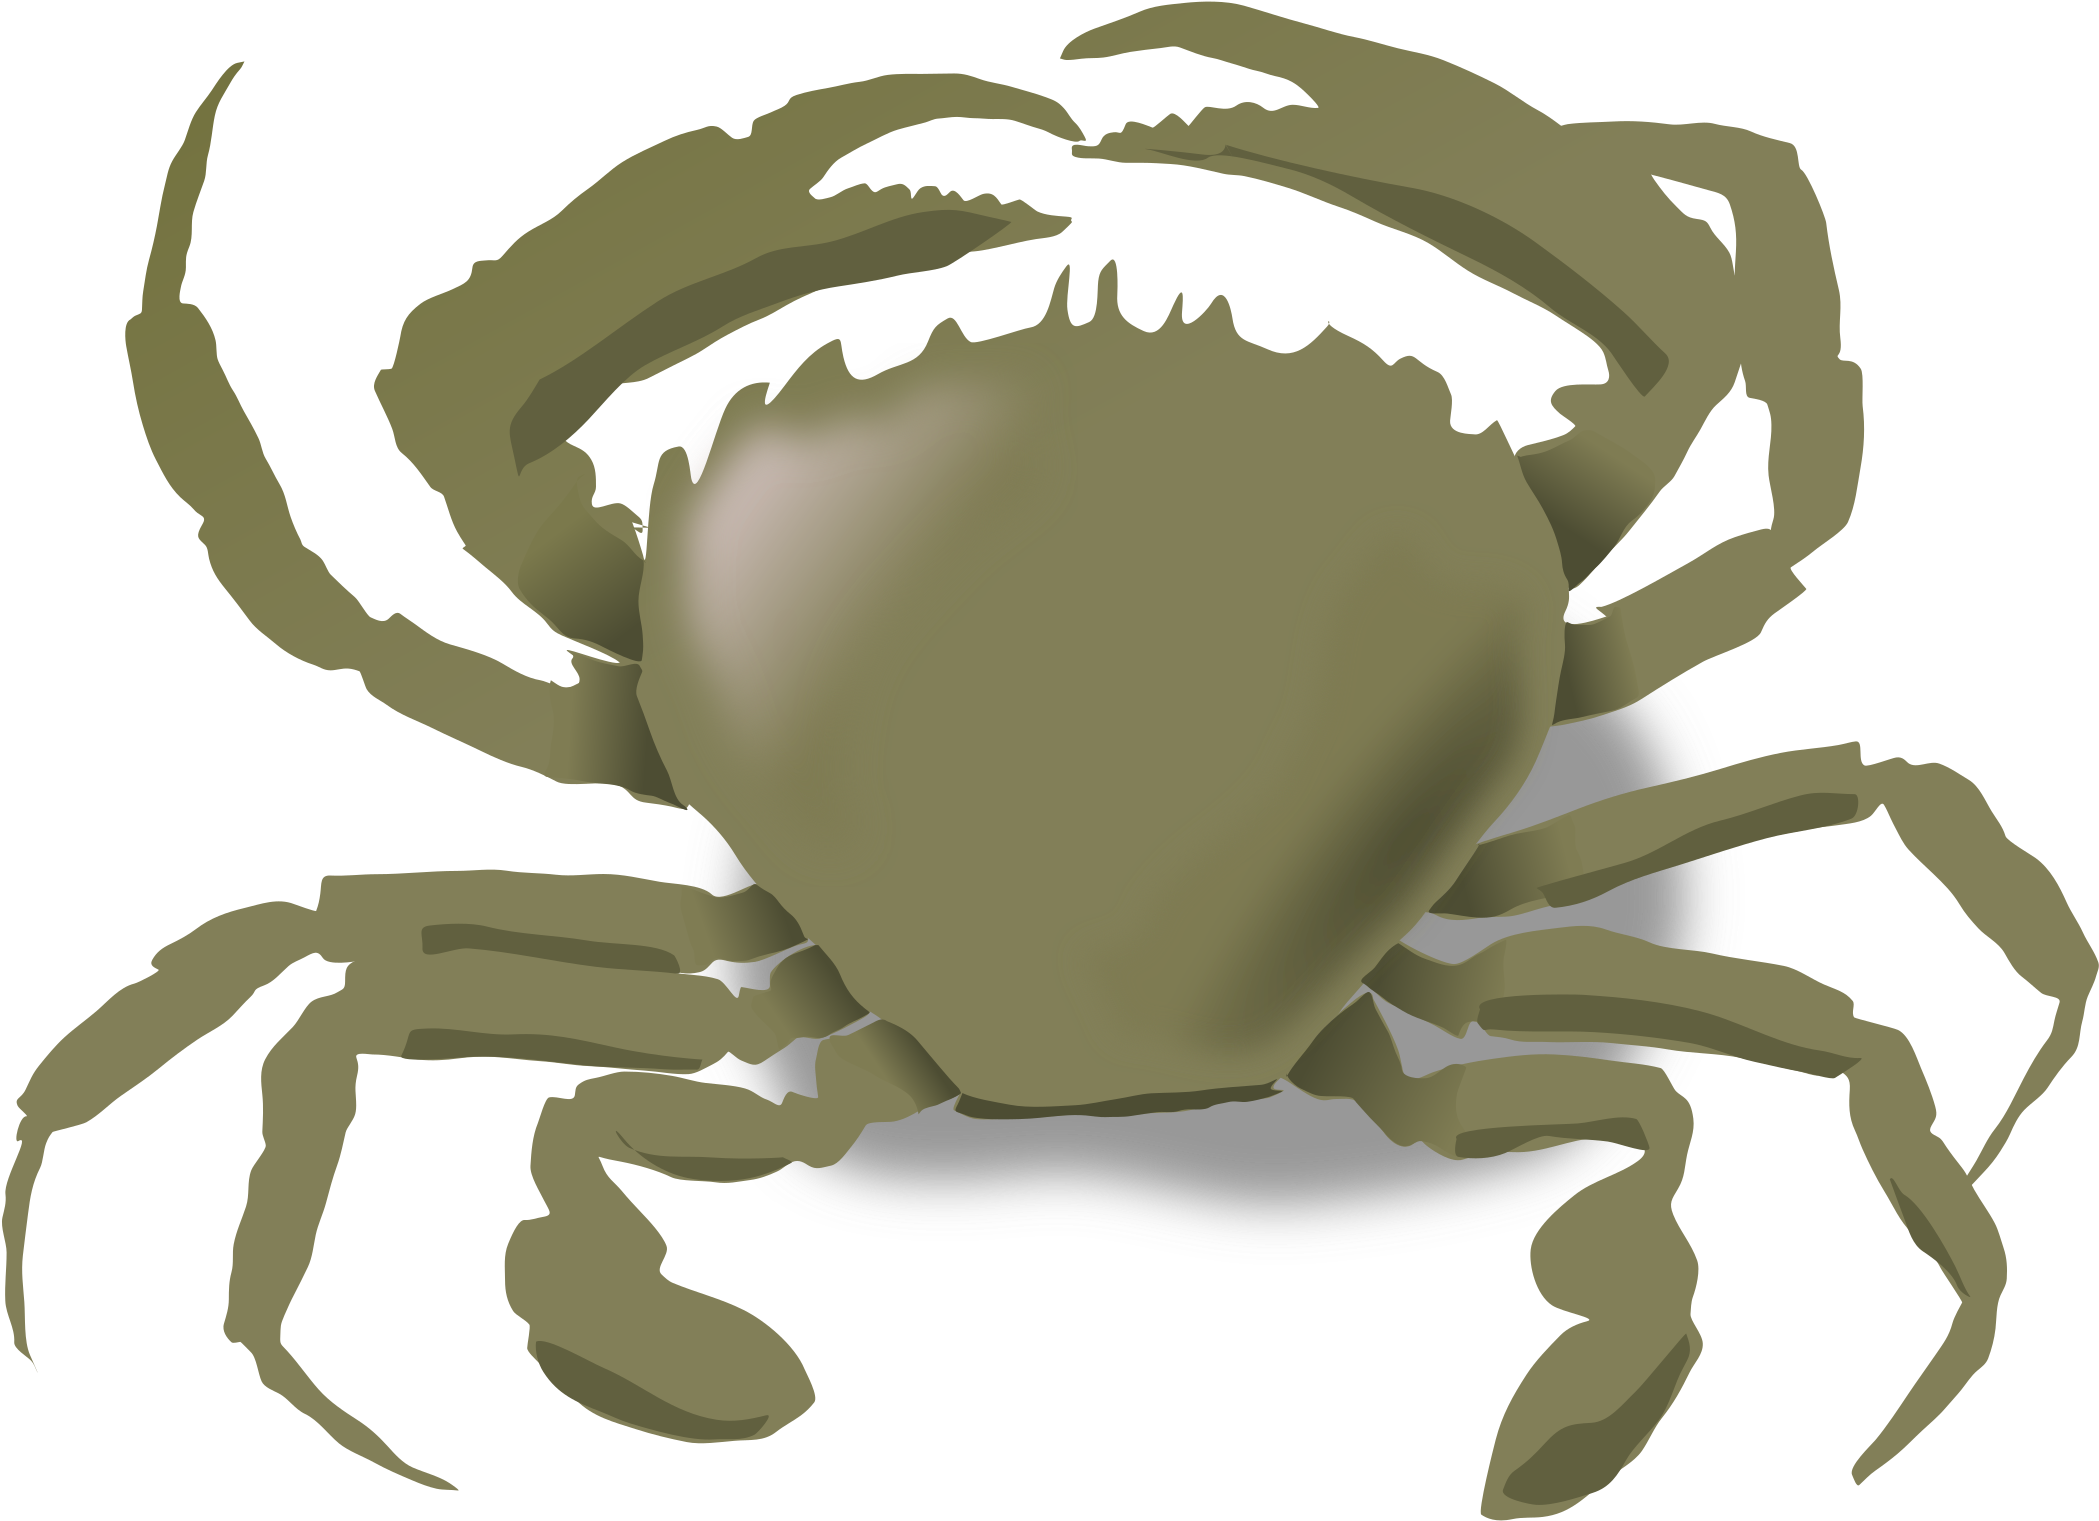 Crabs, Summer, Beach, Animals, Crab, Sea Life, Food, - Animals Live In Water And Land (2400x1800)